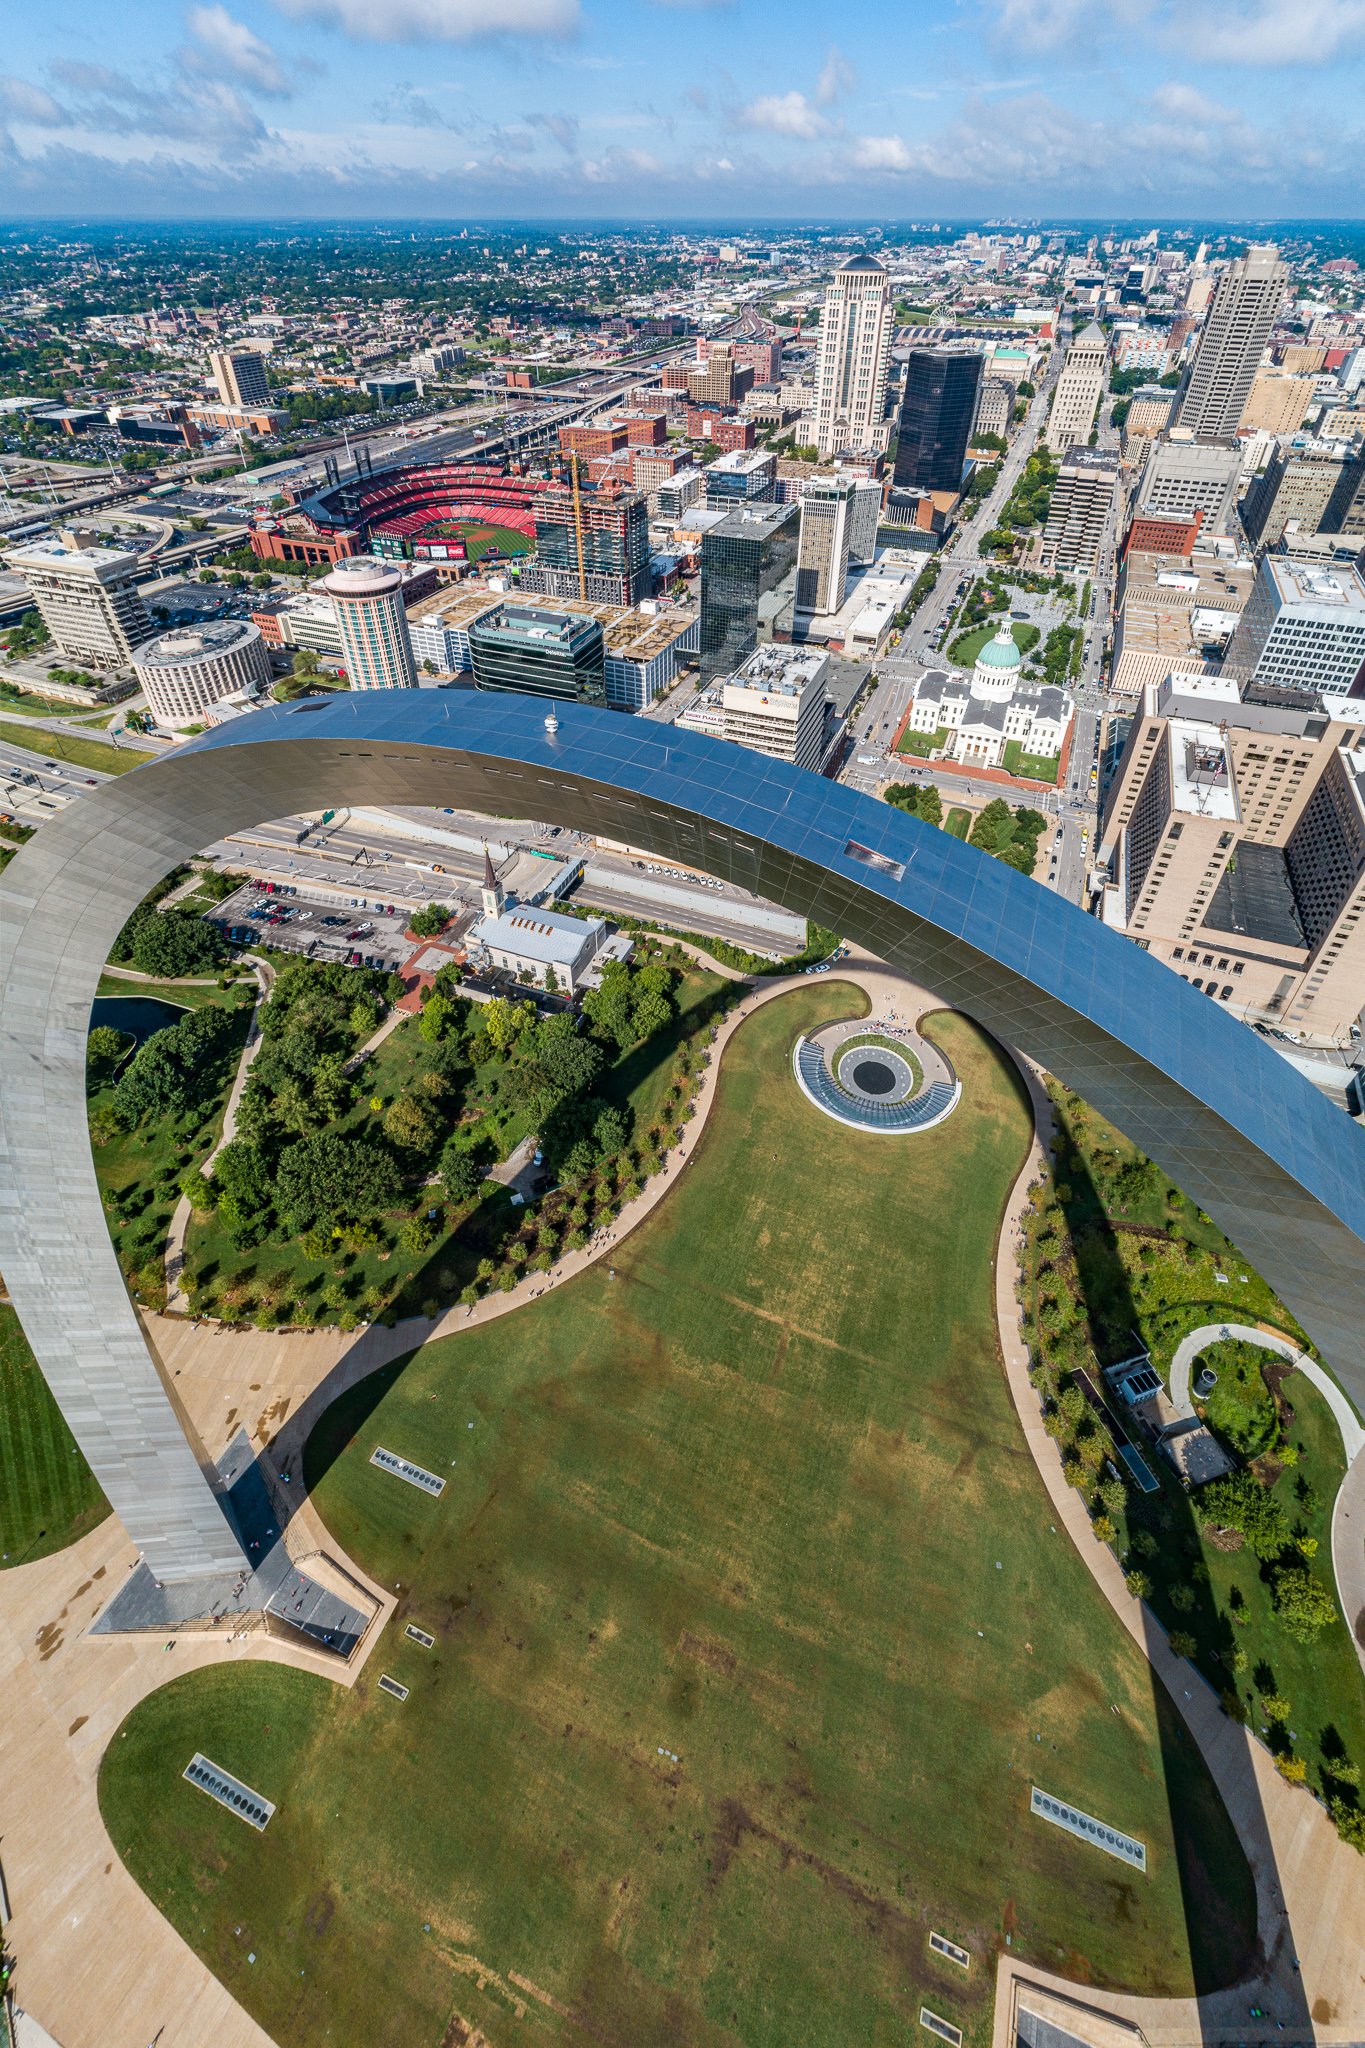 How I Got Permission to Shoot the St. Louis Gateway Arch from Above